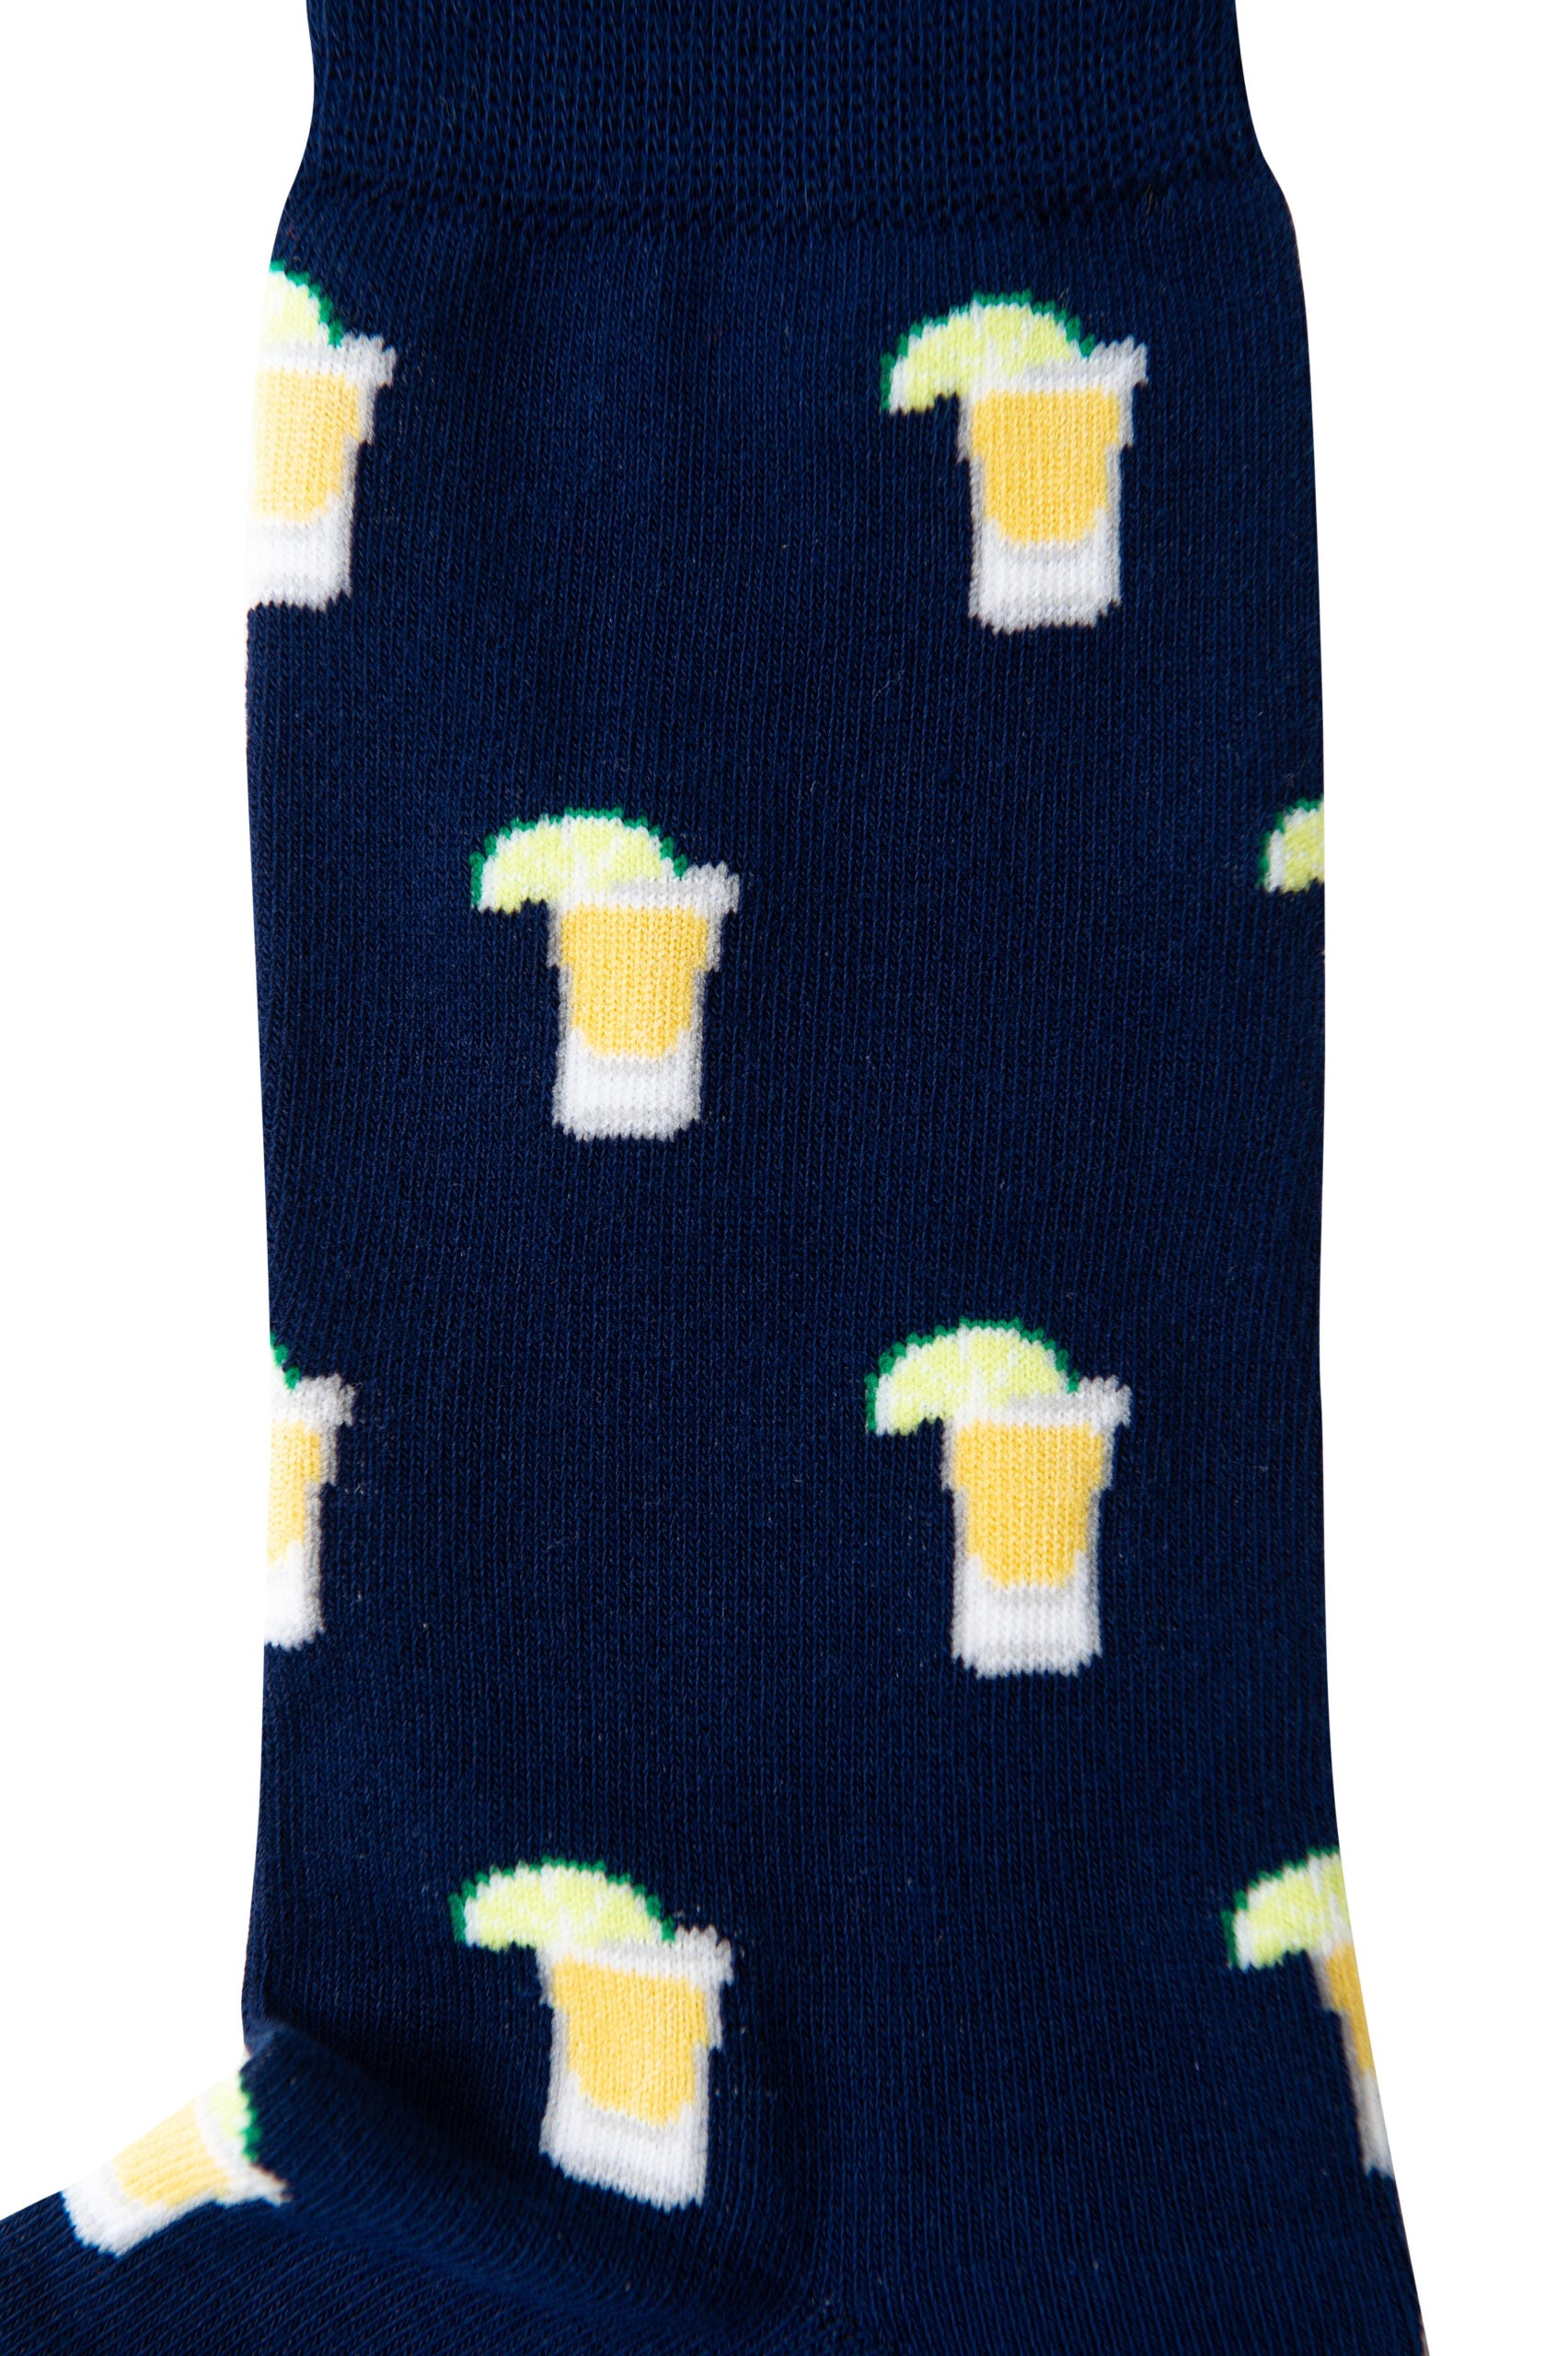 Tequila socks with a pattern of coffee cups, exuding a spirited style.